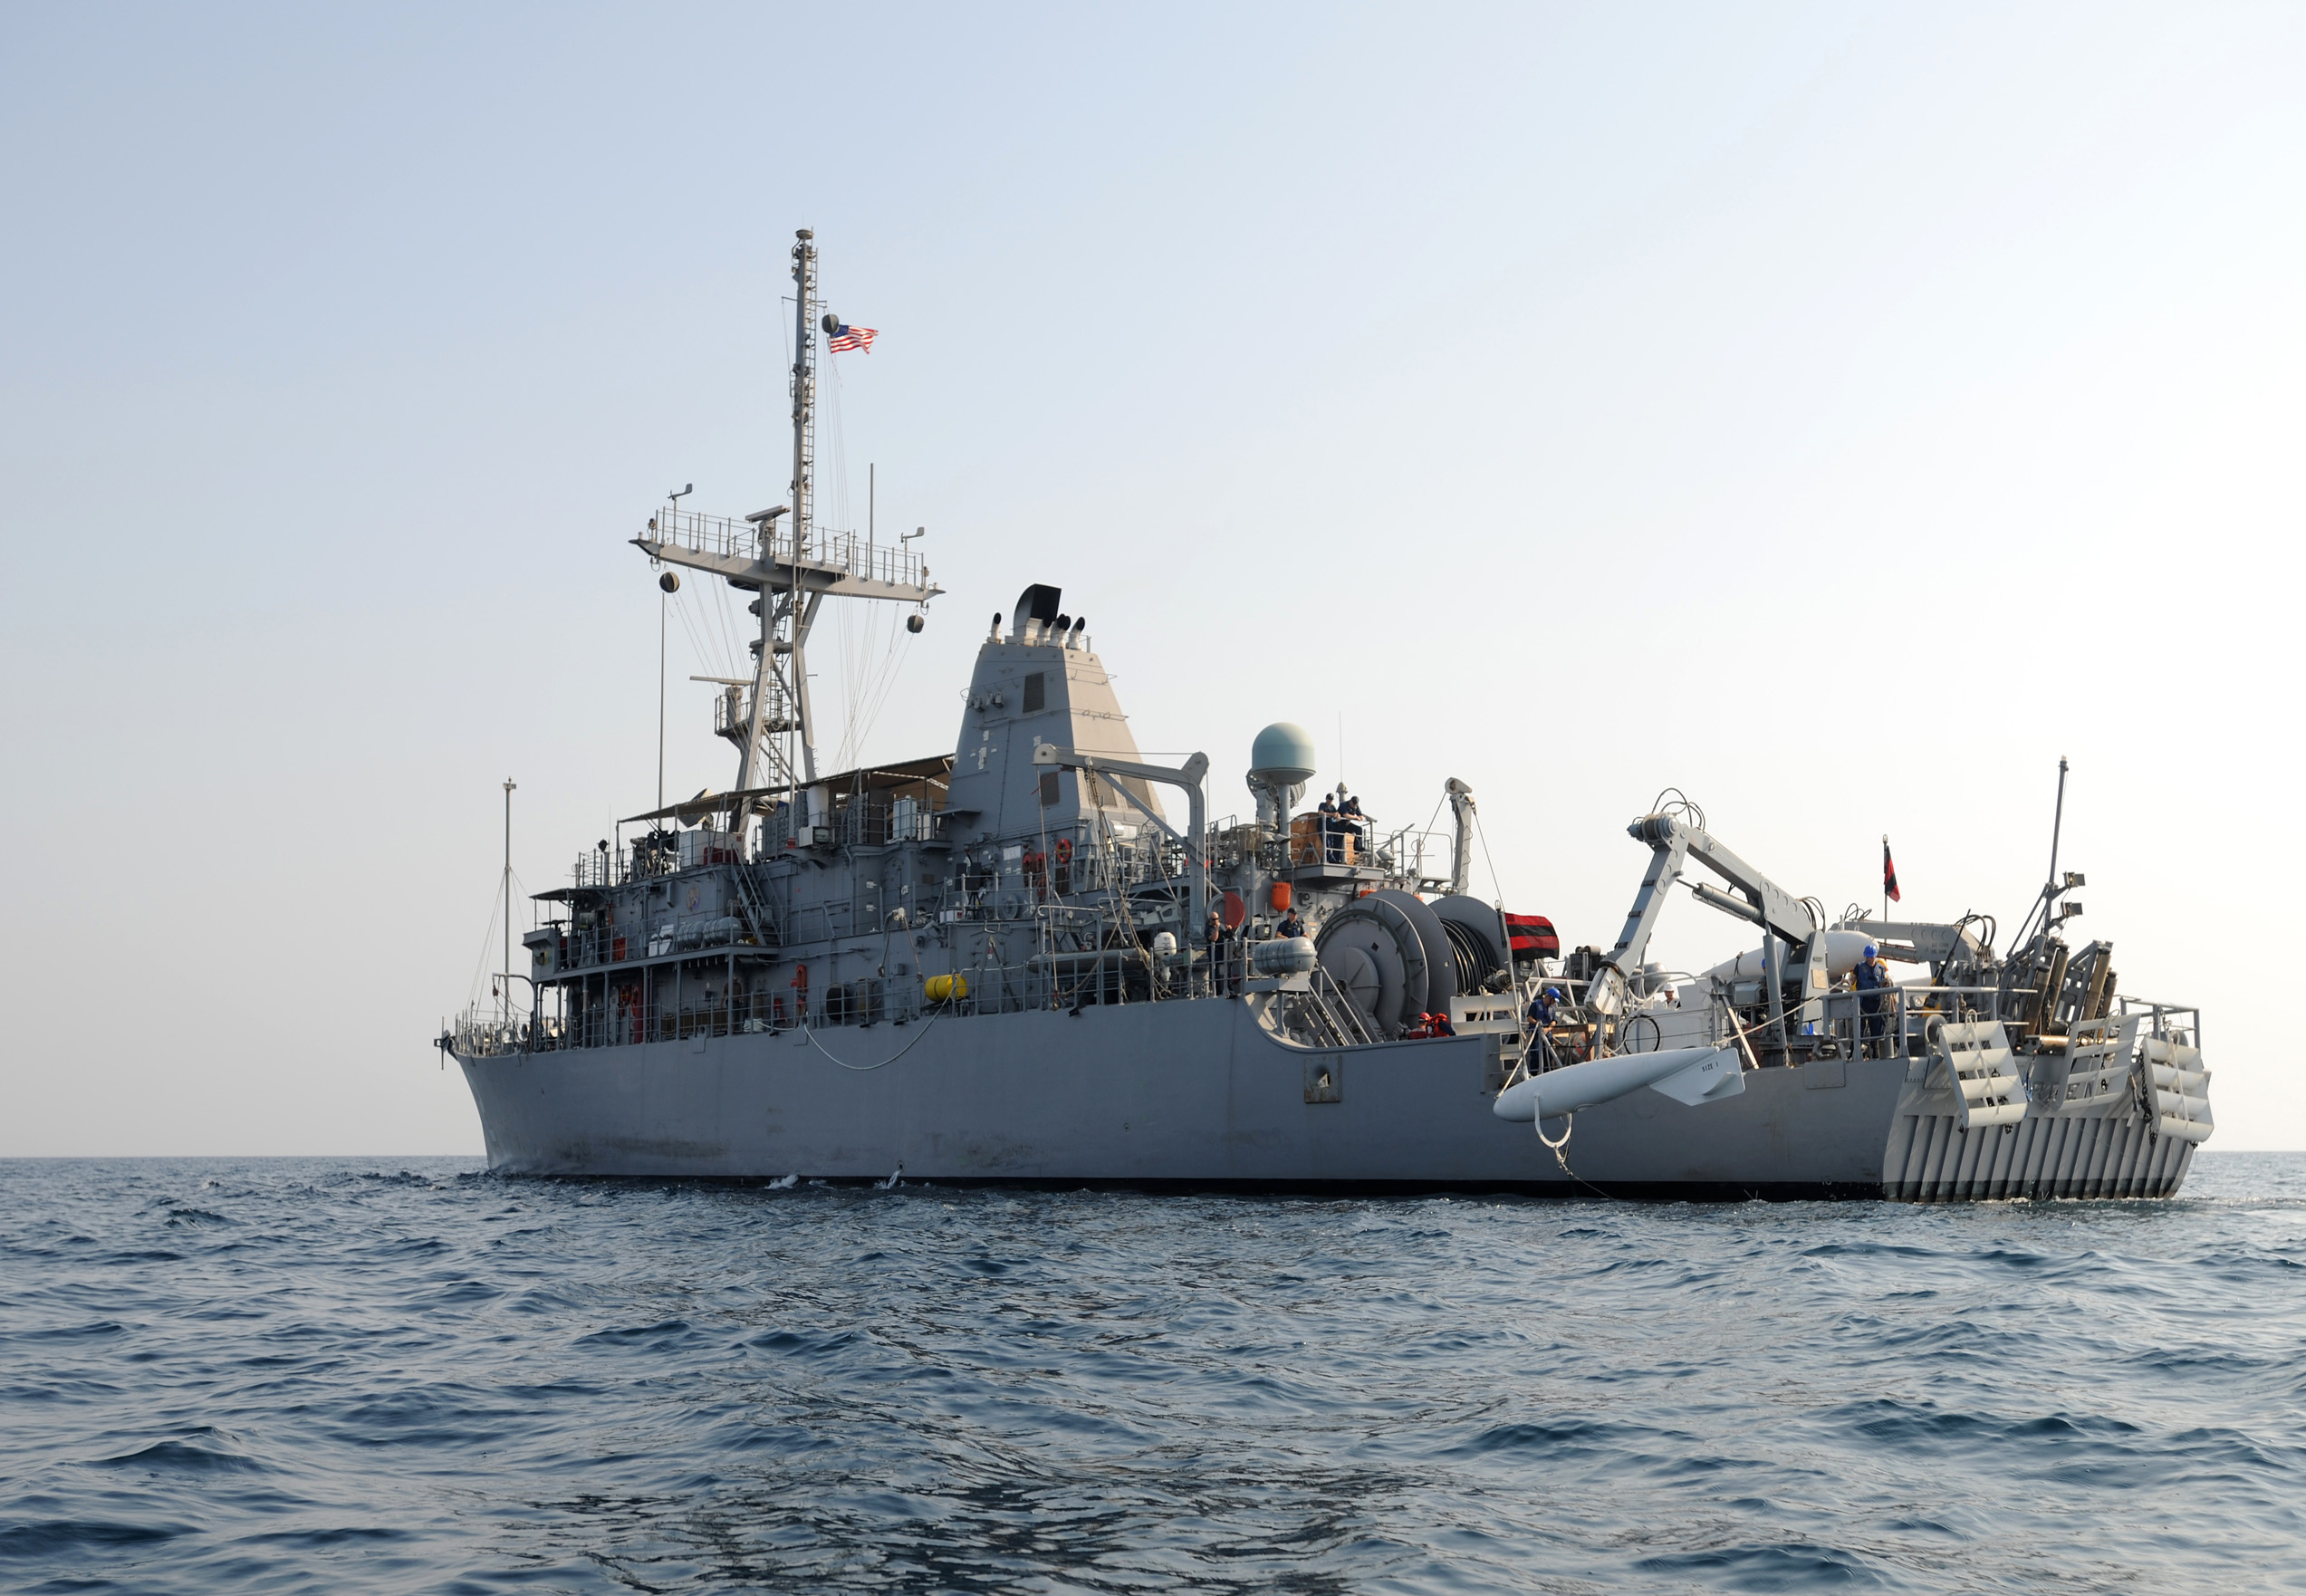 US_Navy_100923-N-0413B-015_The_Avenger-class_mine_countermeasures_ship_USS_Ardent_%28MCM_12%29_conducts_minesweeping_training_with_members_of_Explosive.jpg